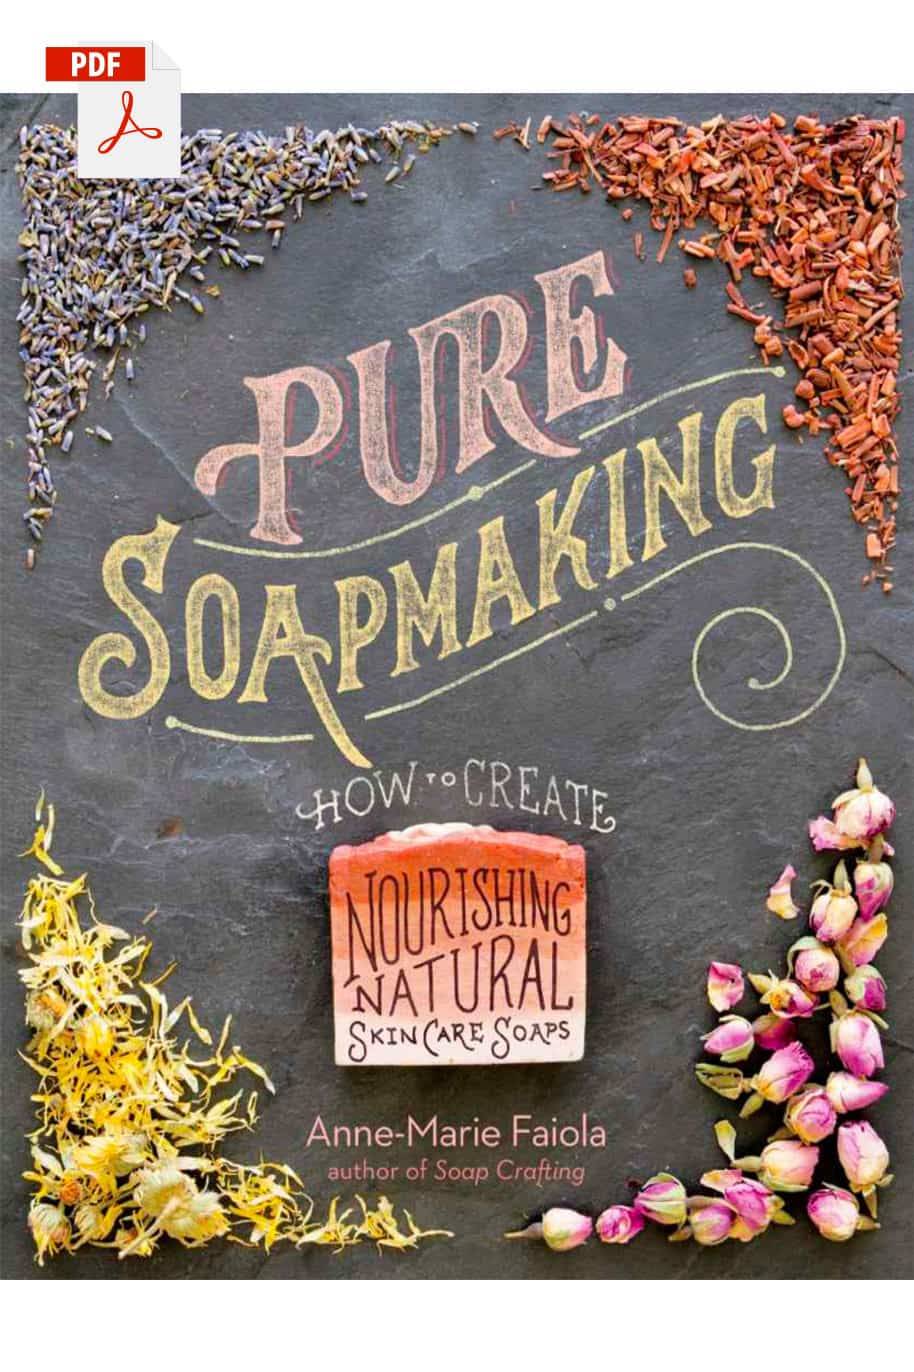 Pure Soap Making - 533 pages